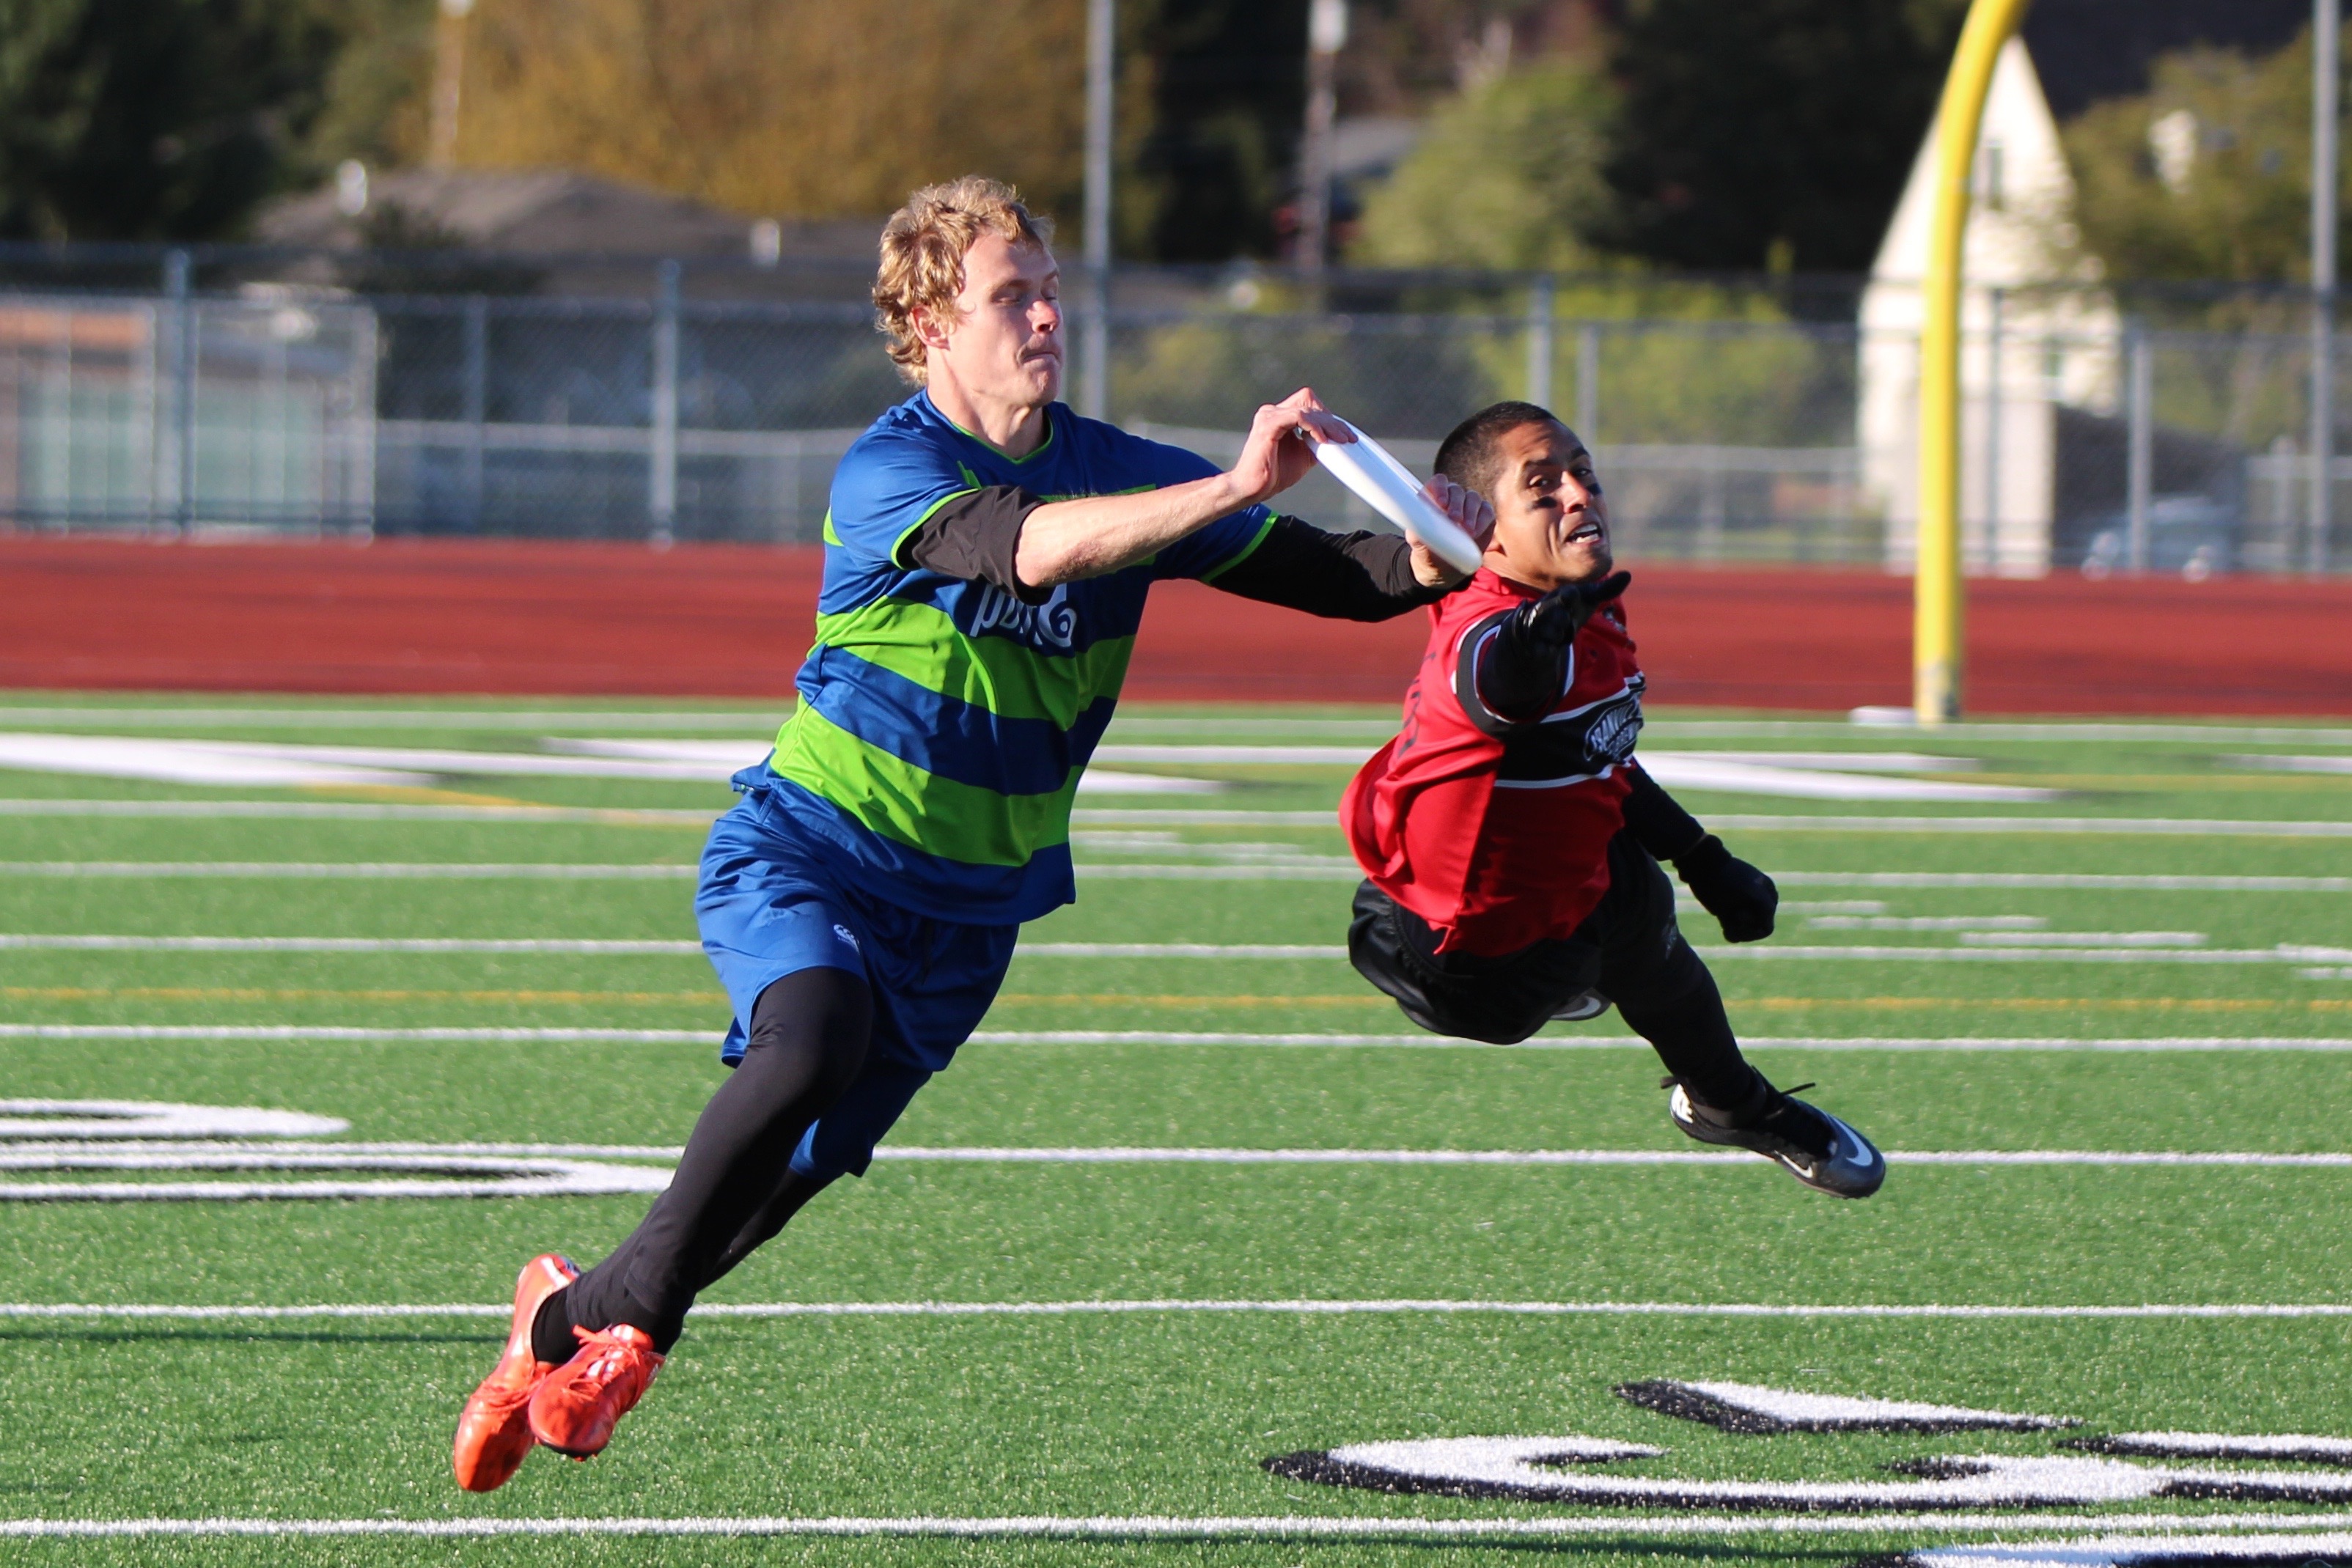 Mount Vernon, WA: Major League Ultimate's Seattle Rainmakers hosted their rivals from the North, the Vancouver Nighthawks, at the annual "Border Bid" match.